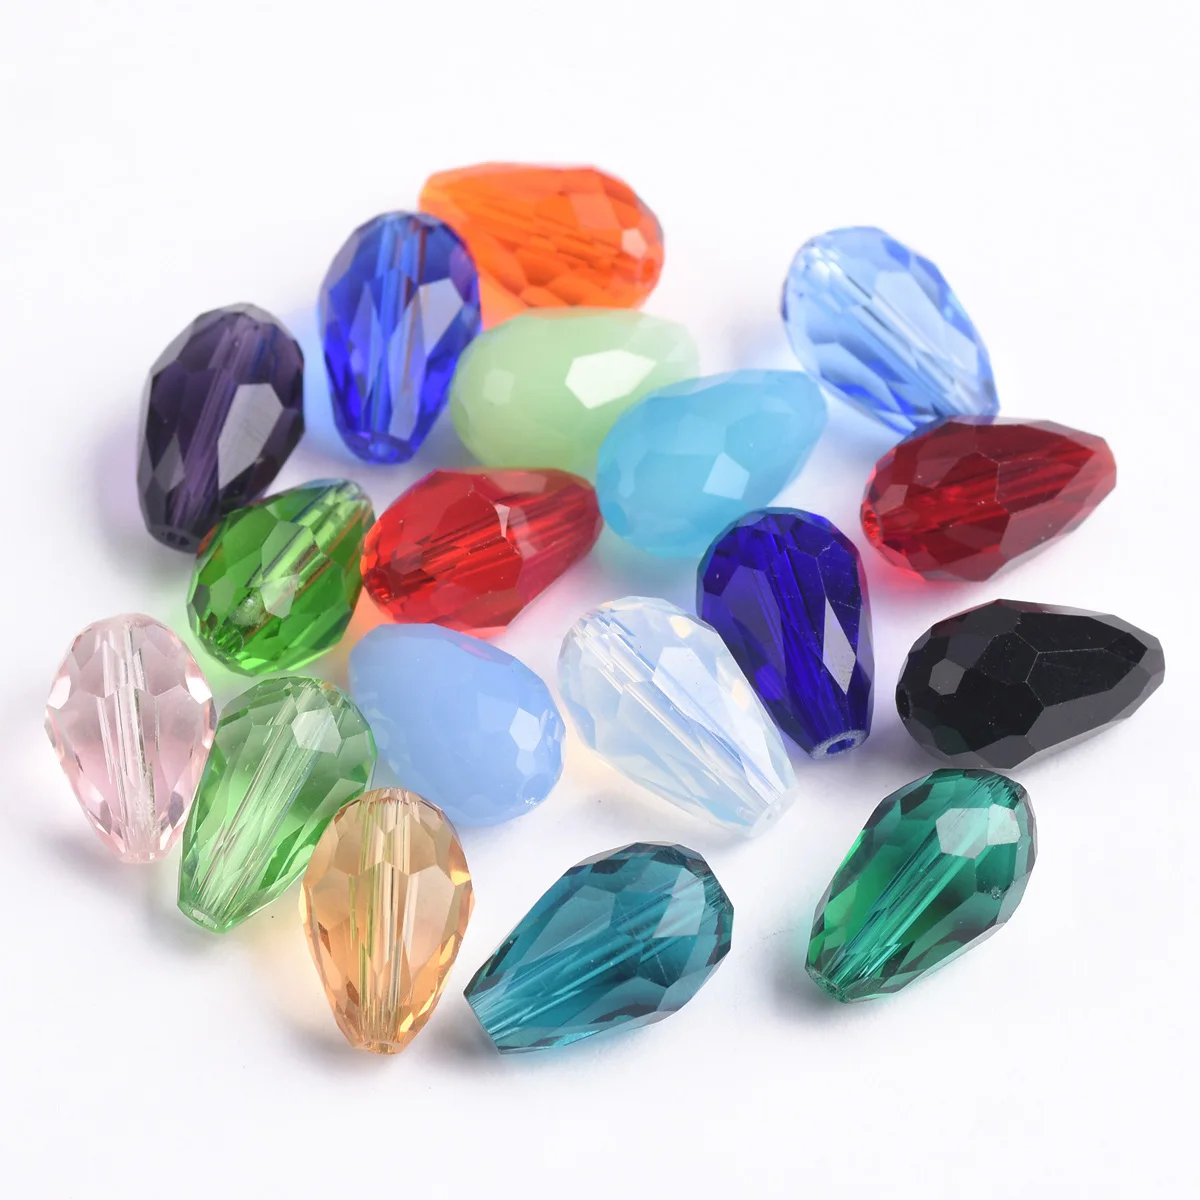 Teardrop Faceted Crystal Glass 5x3mm 8x6mm 12x8mm 15x10mm Loose Beads Lot For Jewelry Making DIY Earring Findings